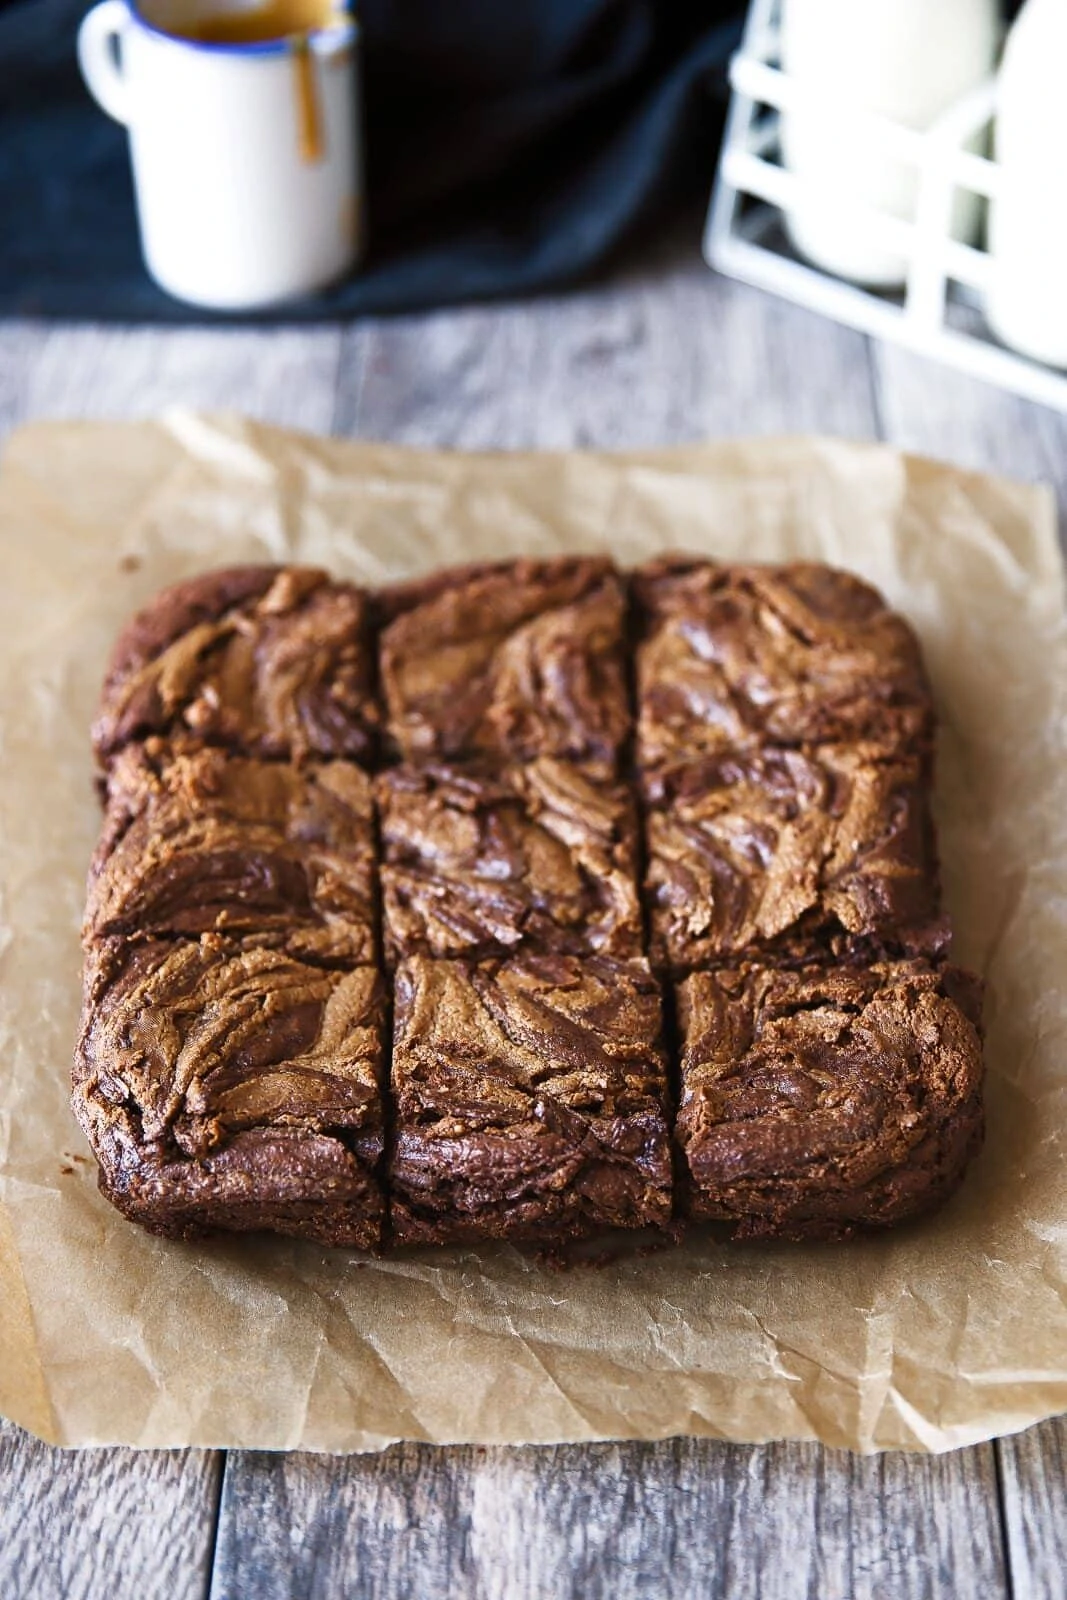 We're taking it back to the classics with fudgy peanut butter brownies